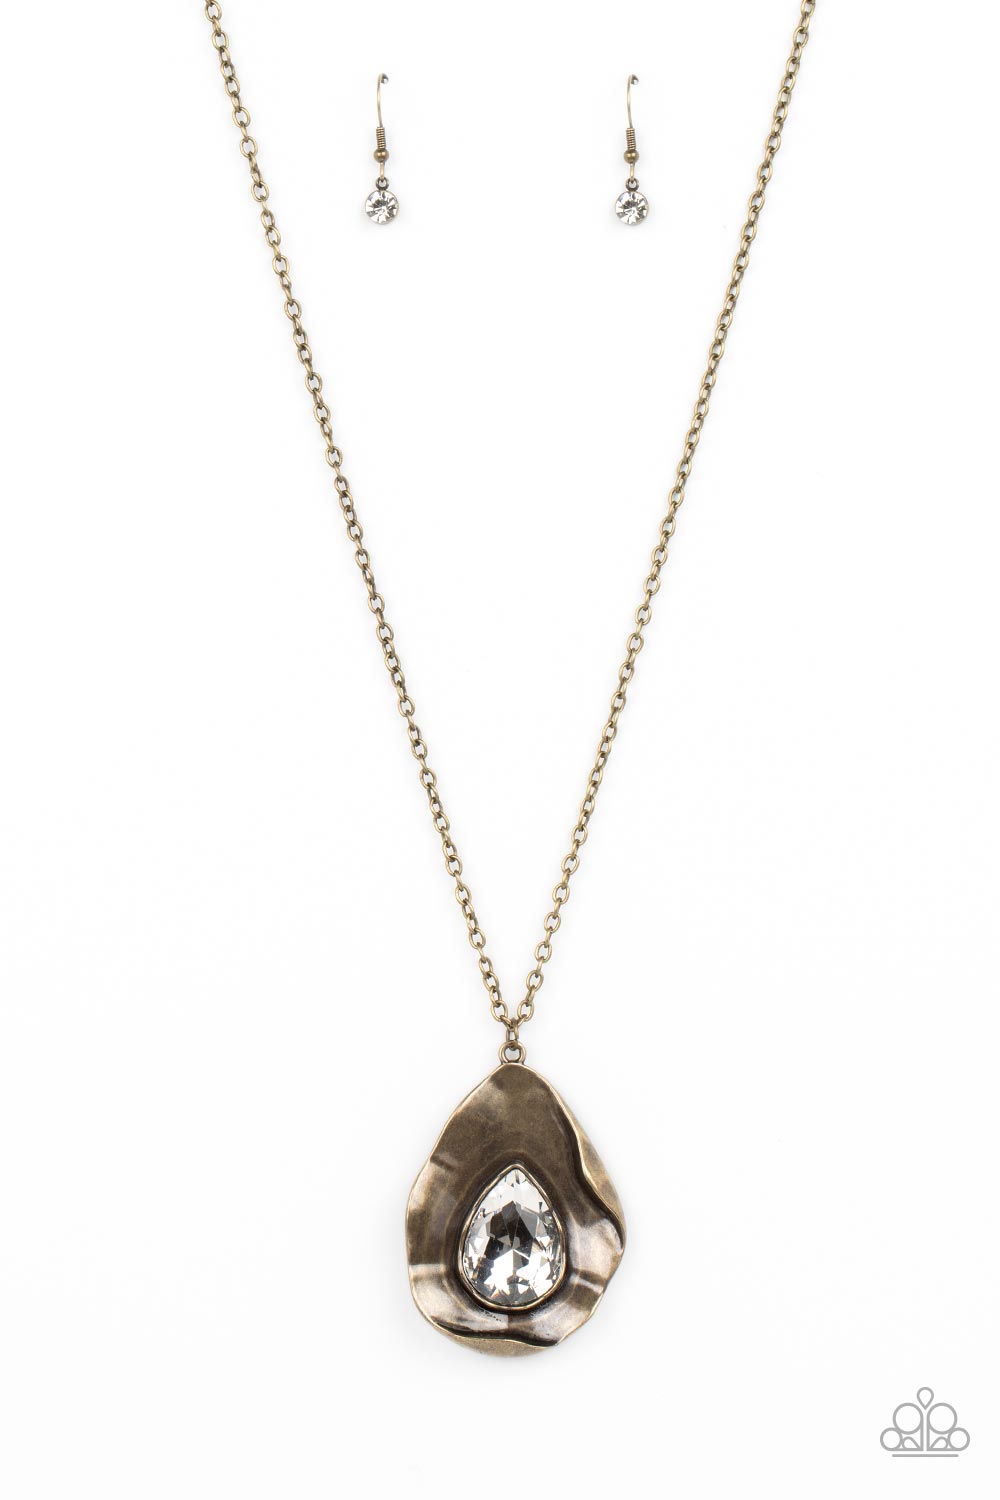 Surrealist Sparkle - Brass Necklace - Paparazzi Accessories - A warped brass frame gently folds around an oversized white teardrop gem center, resulting in a gritty yet glamorous pendant at the bottom of a lengthened brass chain.